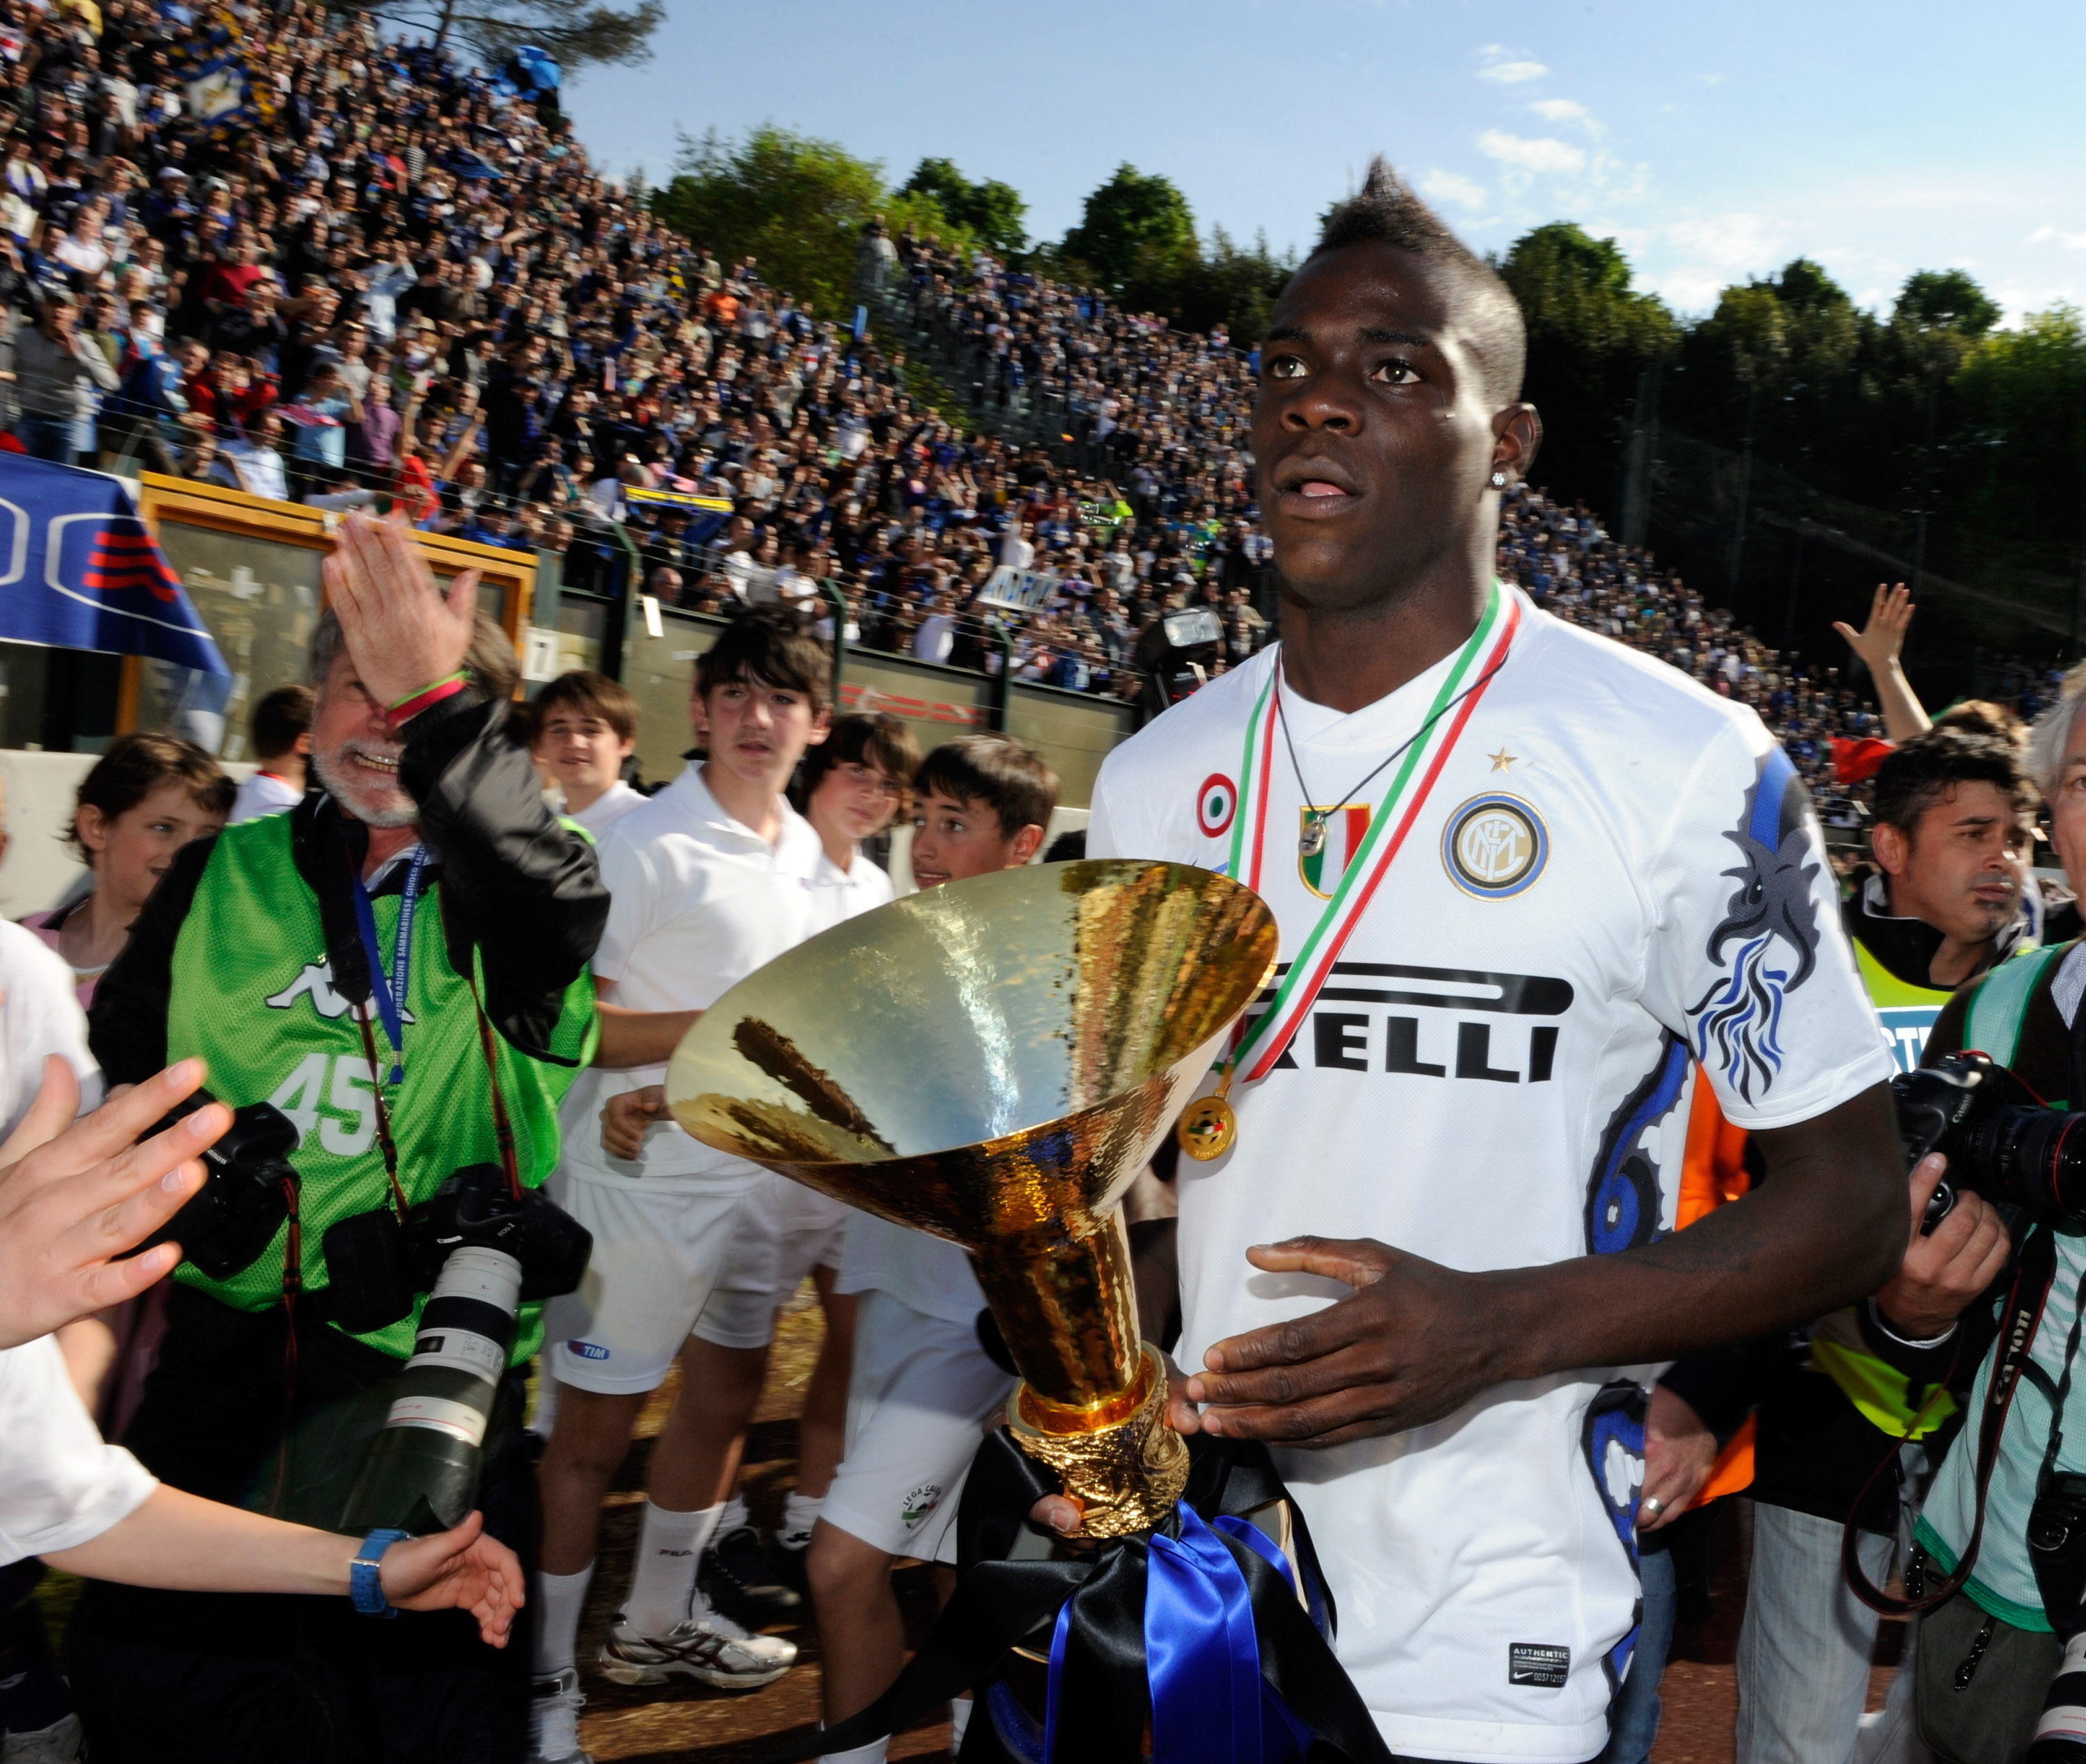 SIENA, ITALY - MAY 16:   Mario Balotelli of Inter Milan celebrates winning the Serie Scudetto after the Serie A match between AC Siena and FC Internazionale Milano at Stadio Artemio Franchi on May 16, 2010 in Siena, Italy.  (Photo by Claudio Villa/Getty I